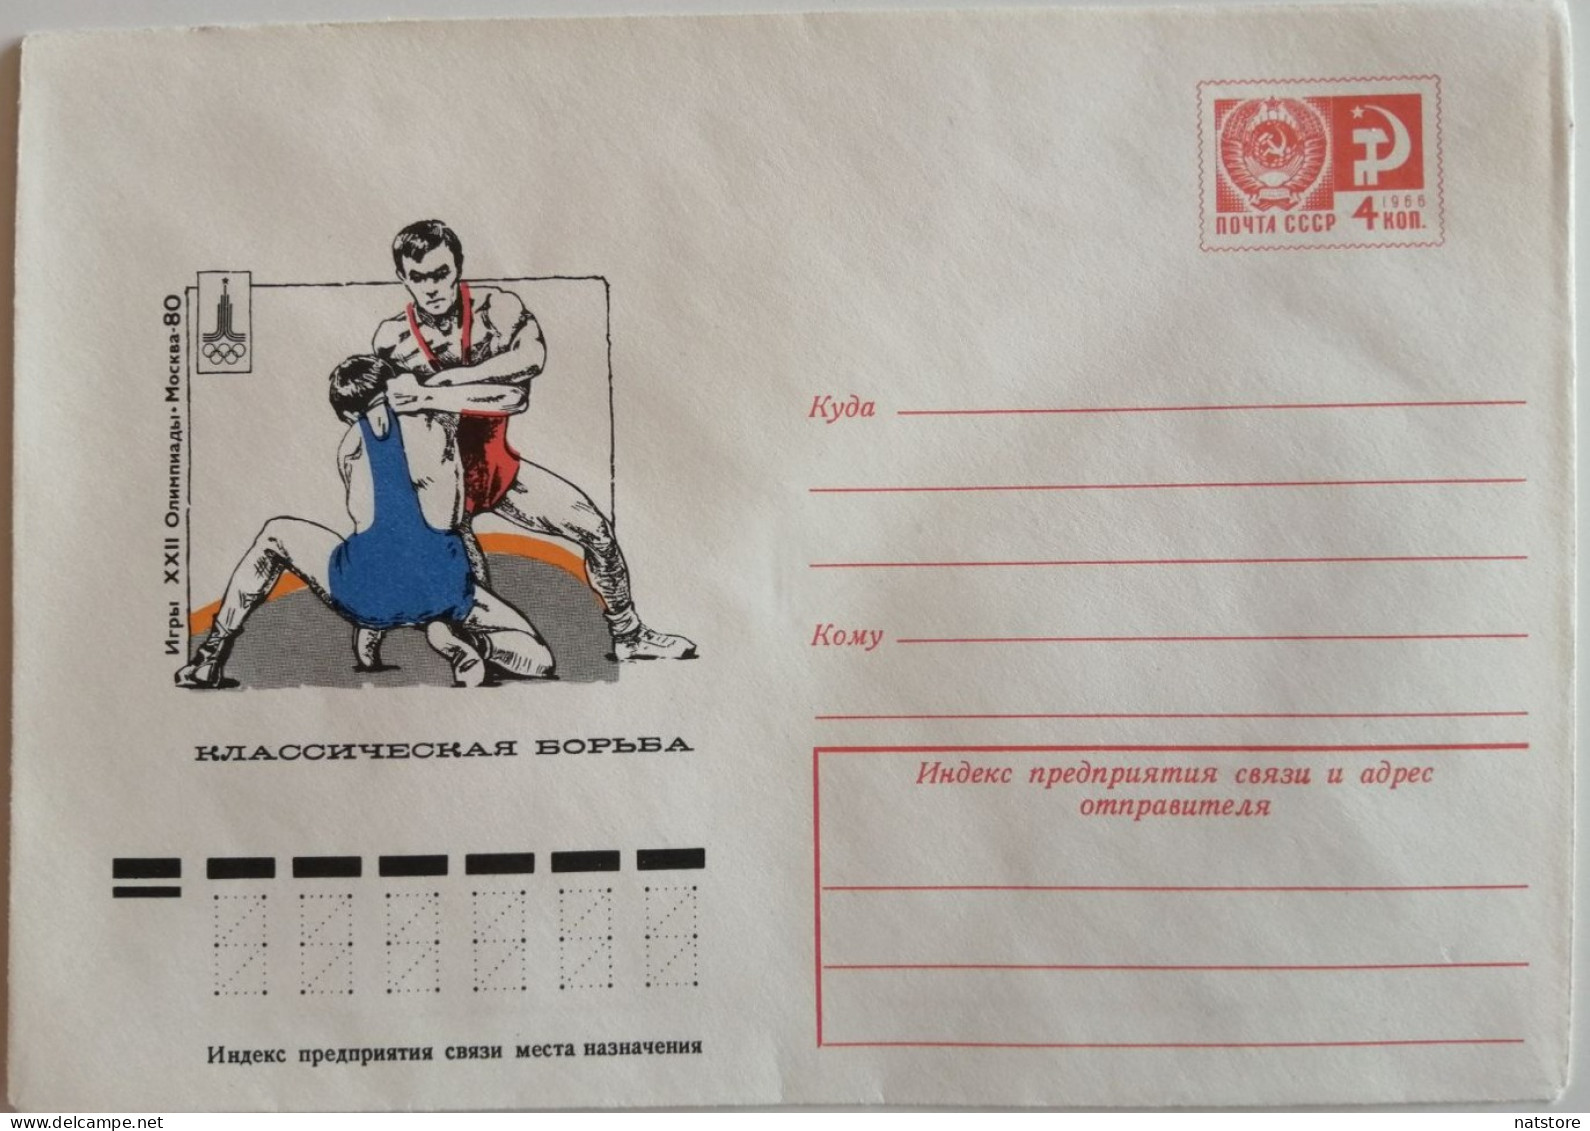 1977..USSR...VINTAGE  COVER WITH STAMP.OLYMPIC GAMES XXII..MOSCOW-80..CLASSIC FIGHT - Verano 1980: Moscu